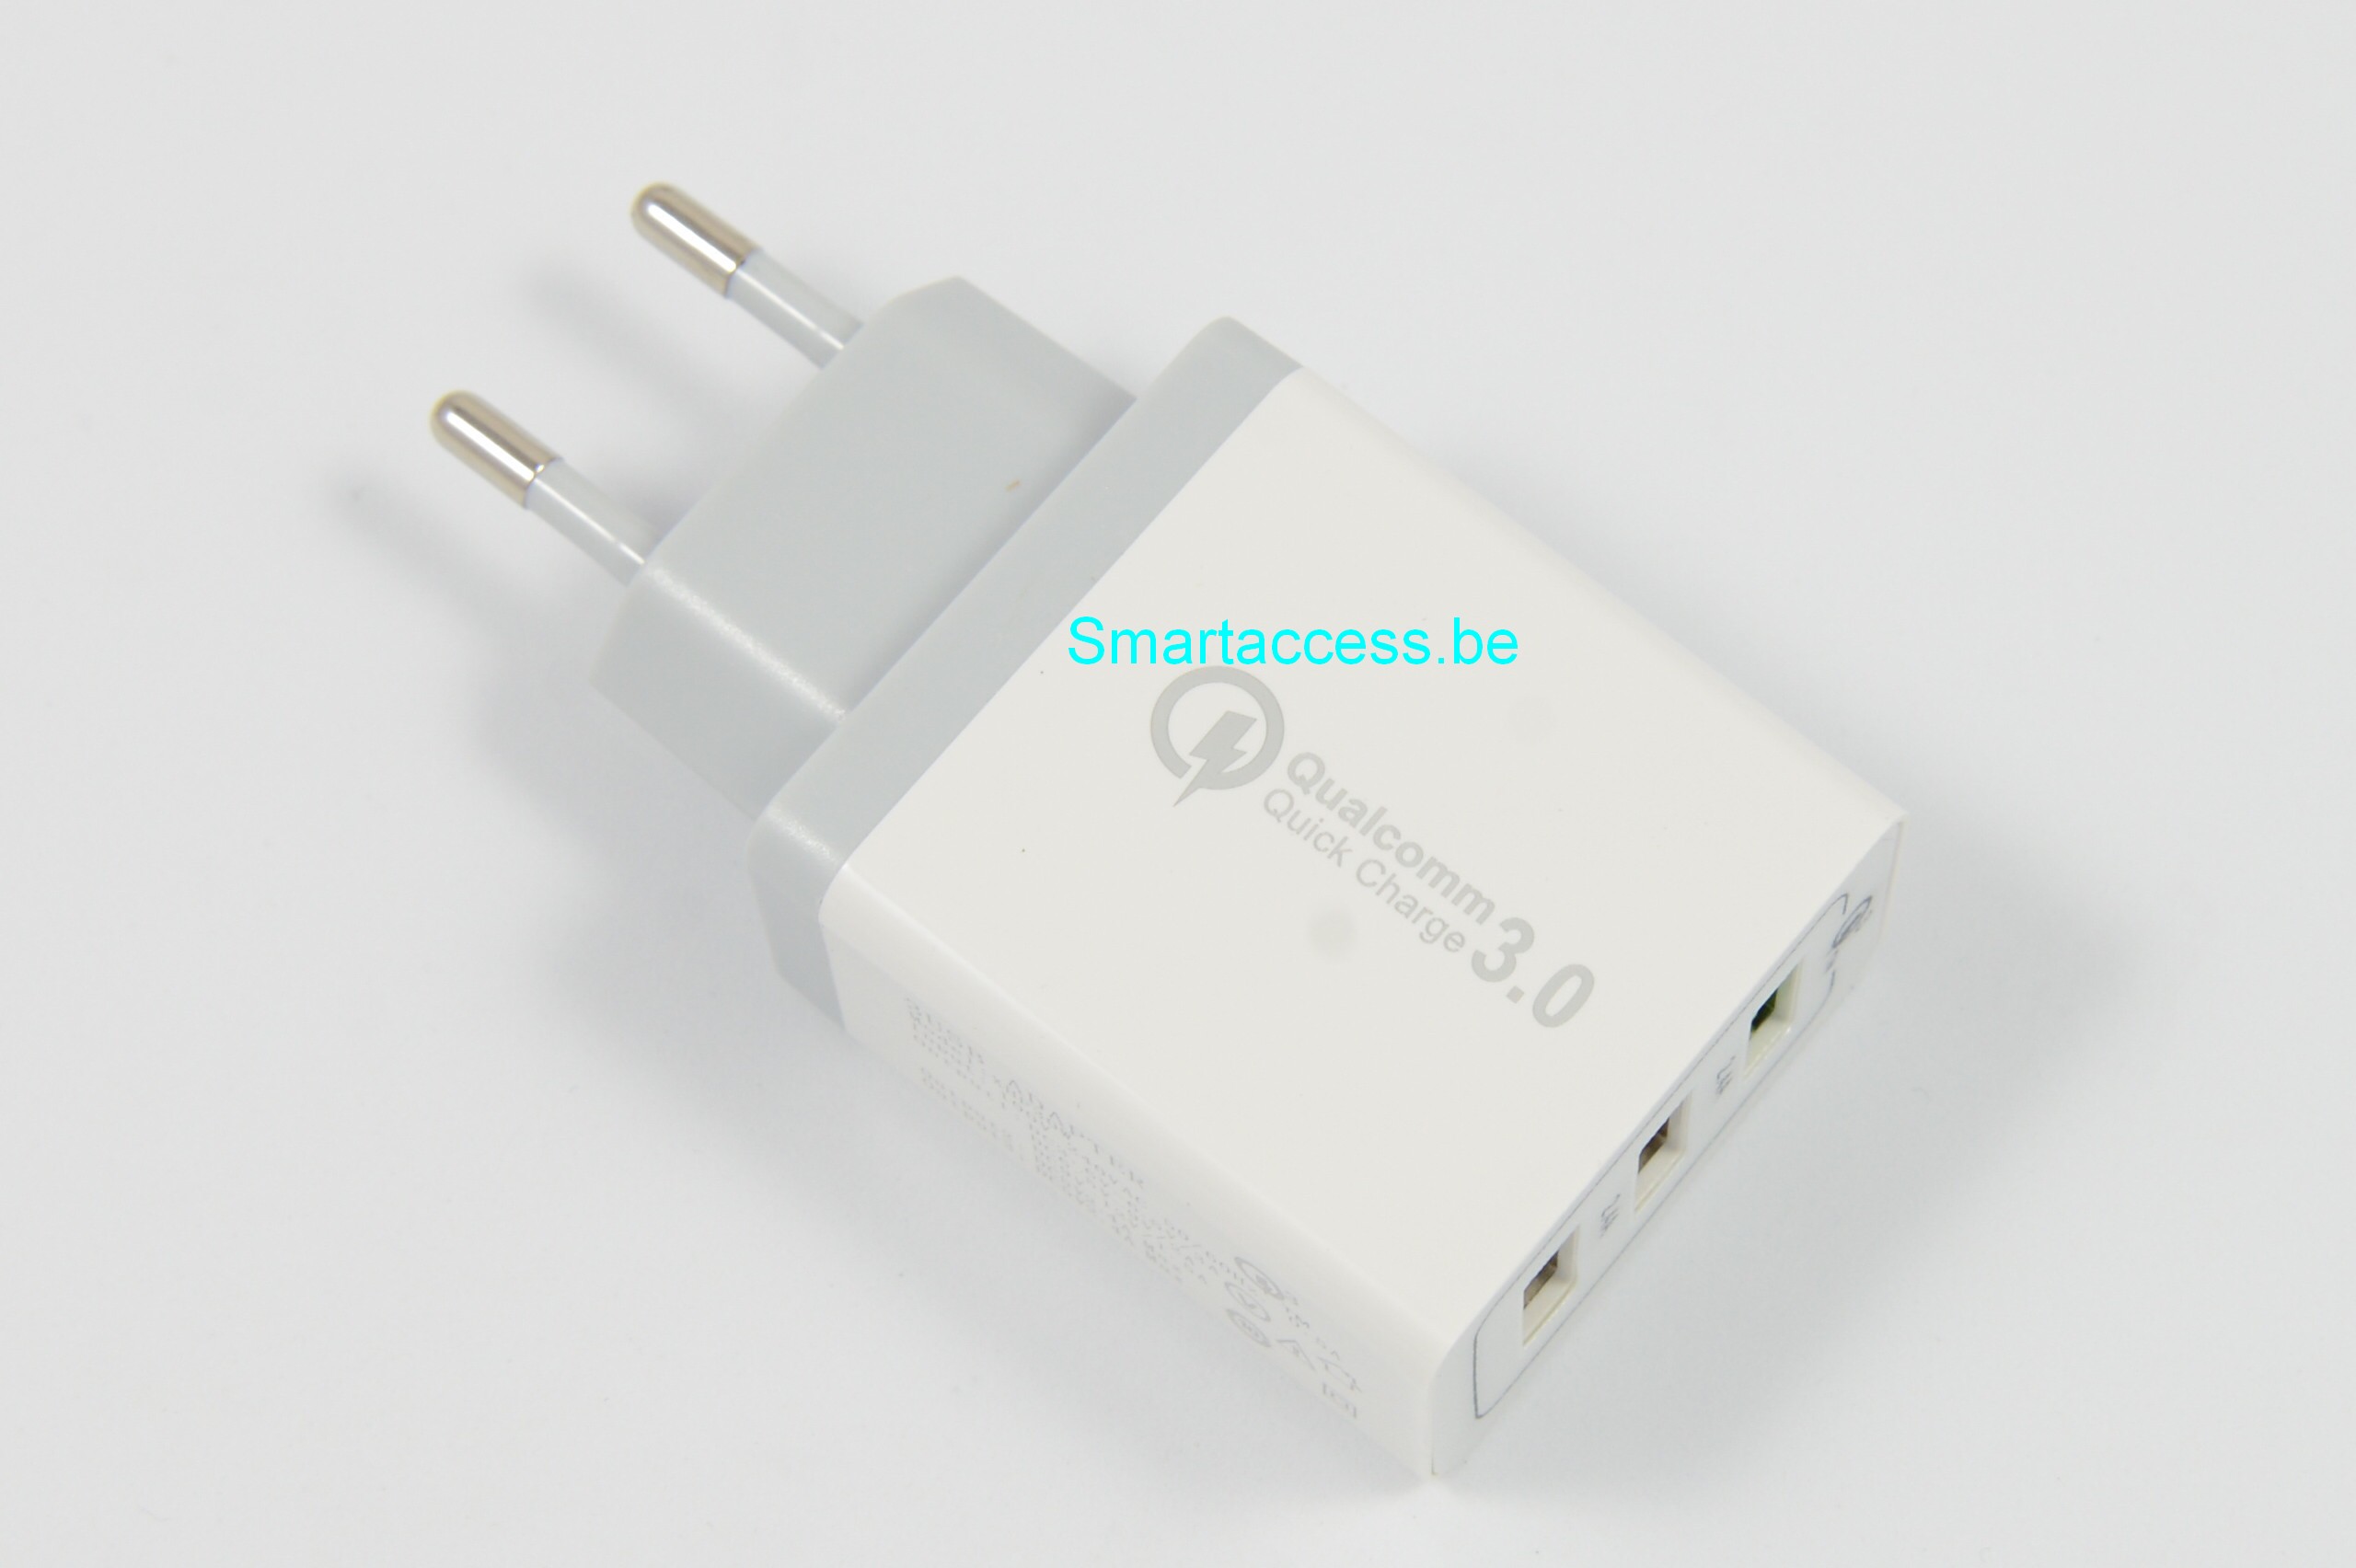 Chargeur USB 3 Ports Quick Charge pour iPhone iPad Samsung Huawei Sony ASUS..